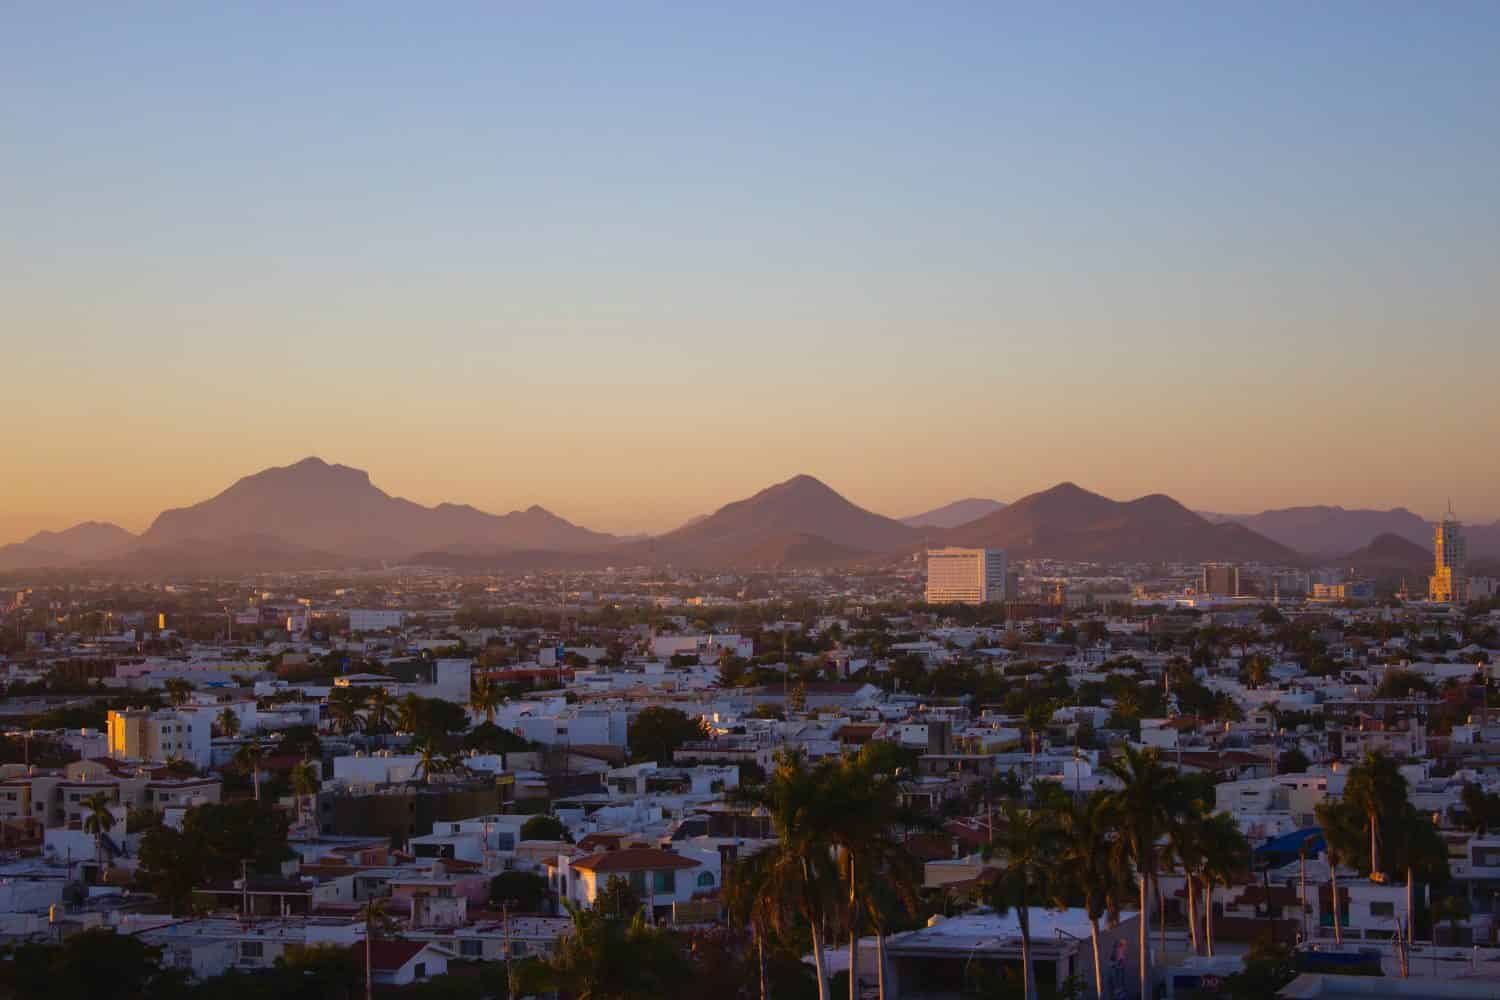 Landscape of a city of Mexico (culiacan) with view of the mountains.